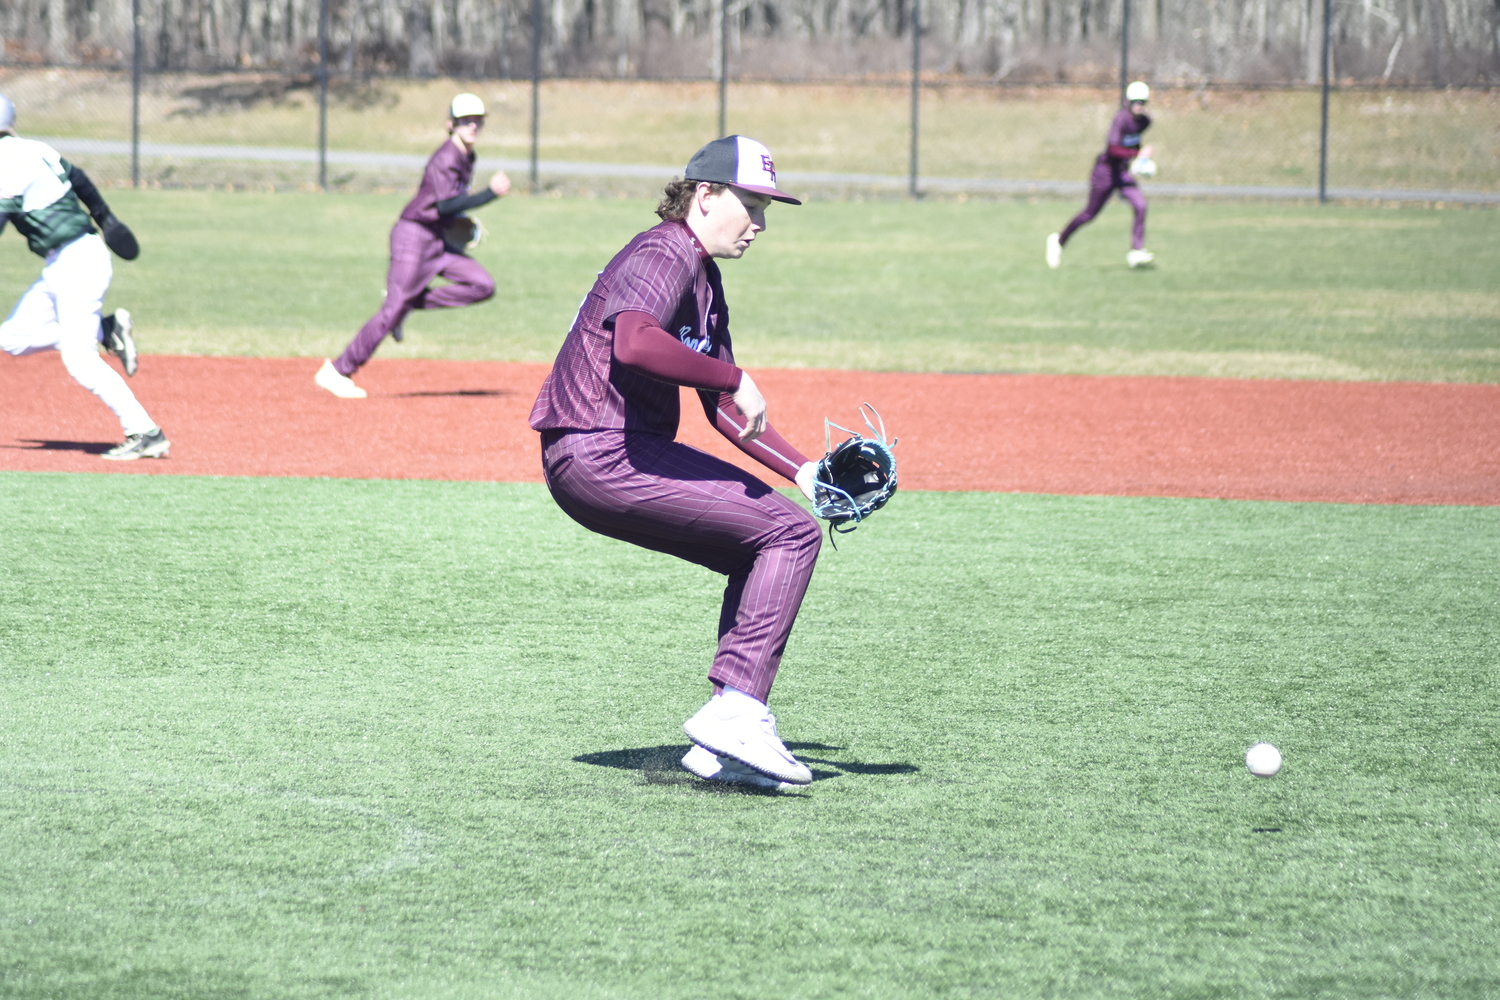 Finn O'Rourke hops off the mound to field the ball.   DREW BUDD